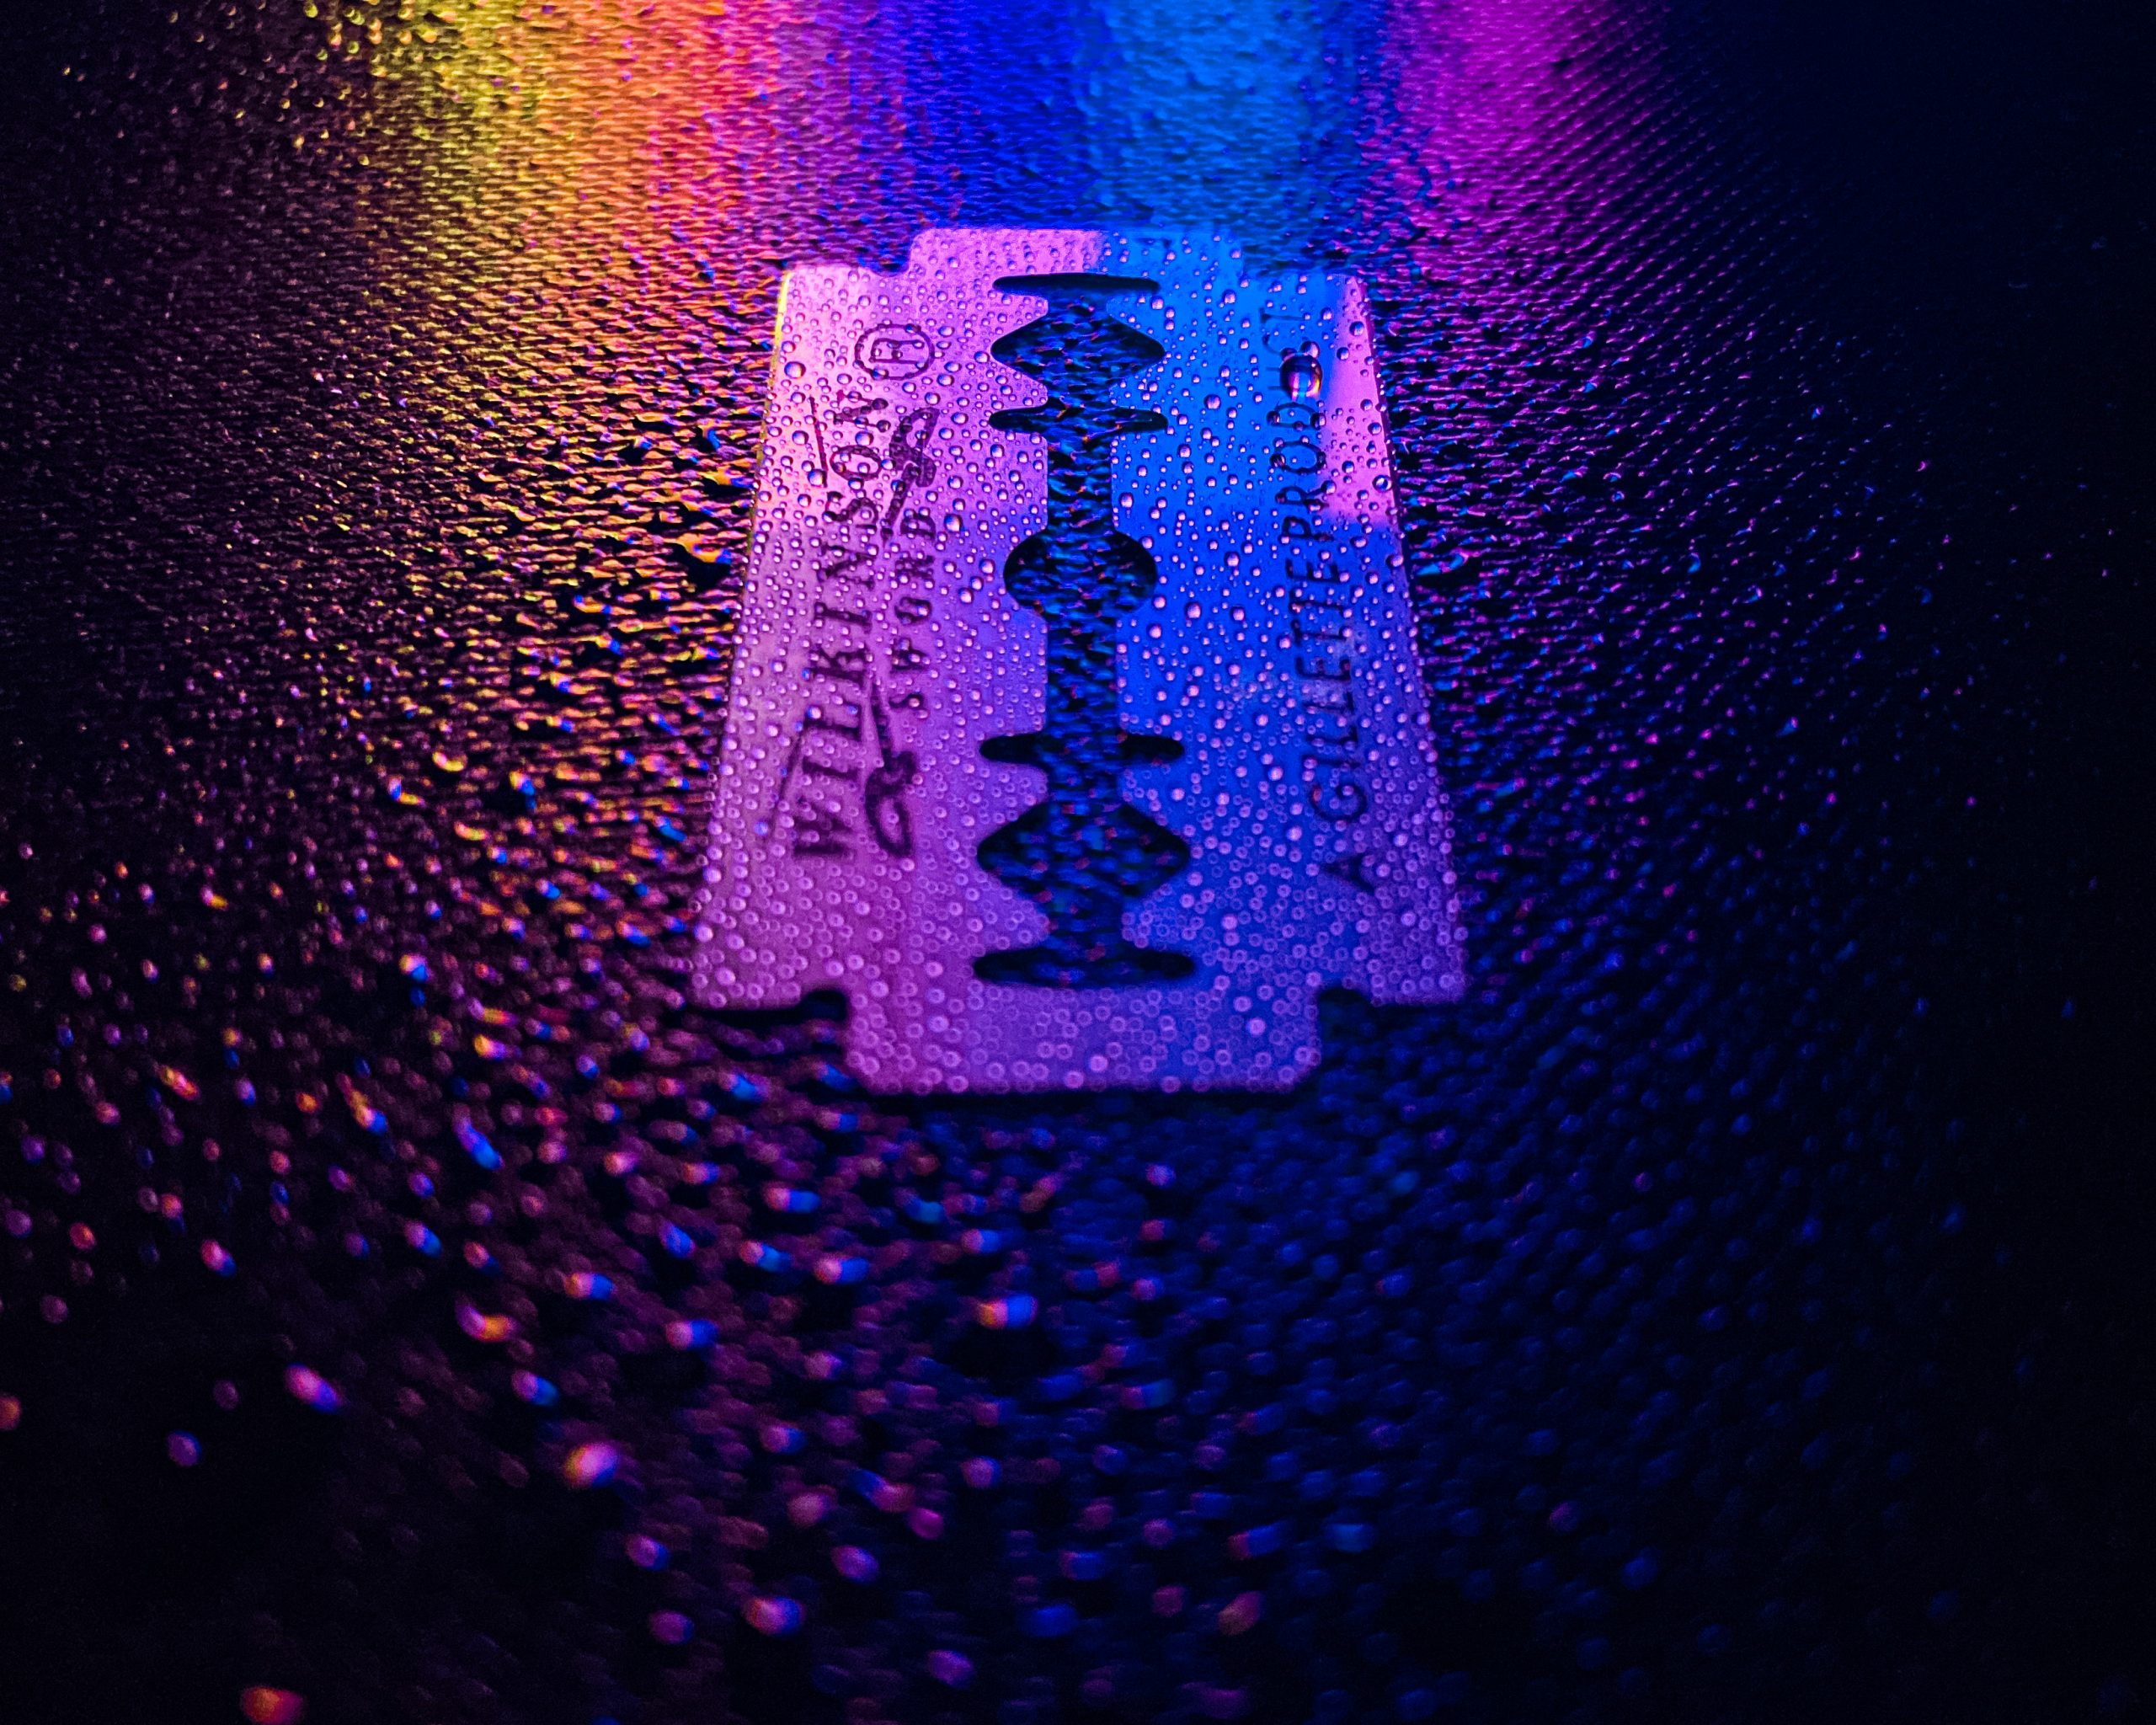 A colorful shot of men's grooming blade .